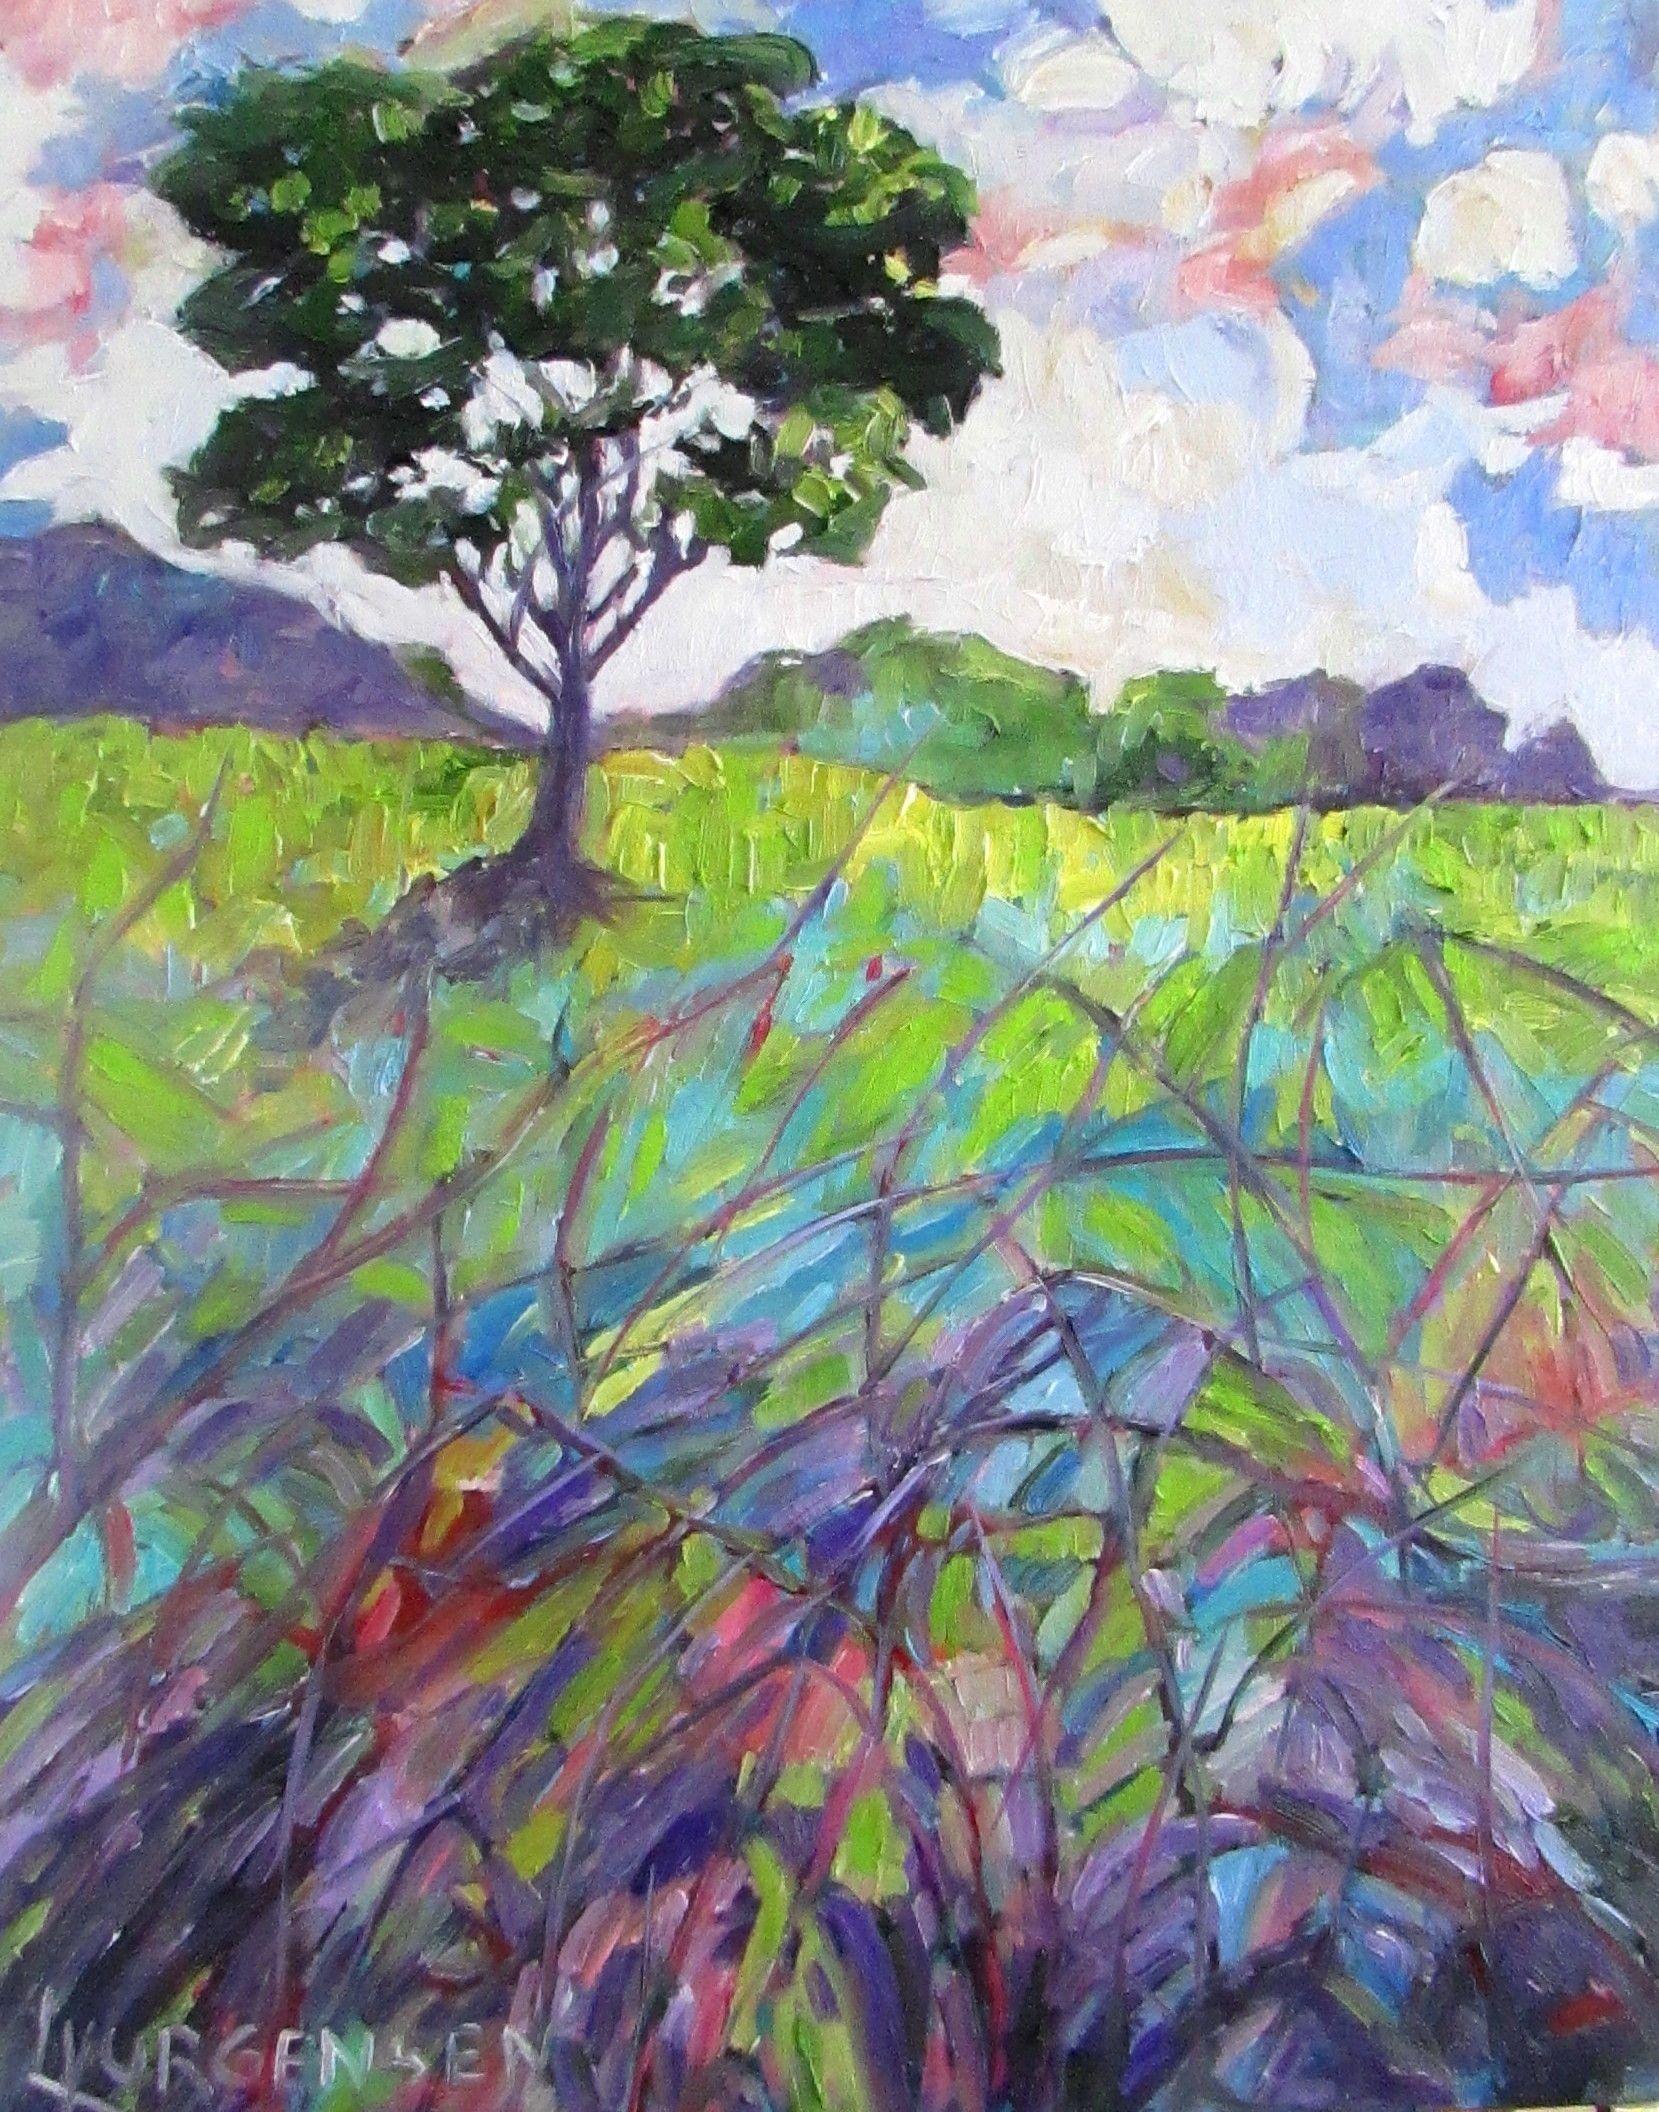 While out on a hike I came across this lone tree in a field of tall grasses beyond some thick blackberry brambles. I loved the intertwining of the brambles and the colorful grasses and made this painting that is full of thick texture and vibrant